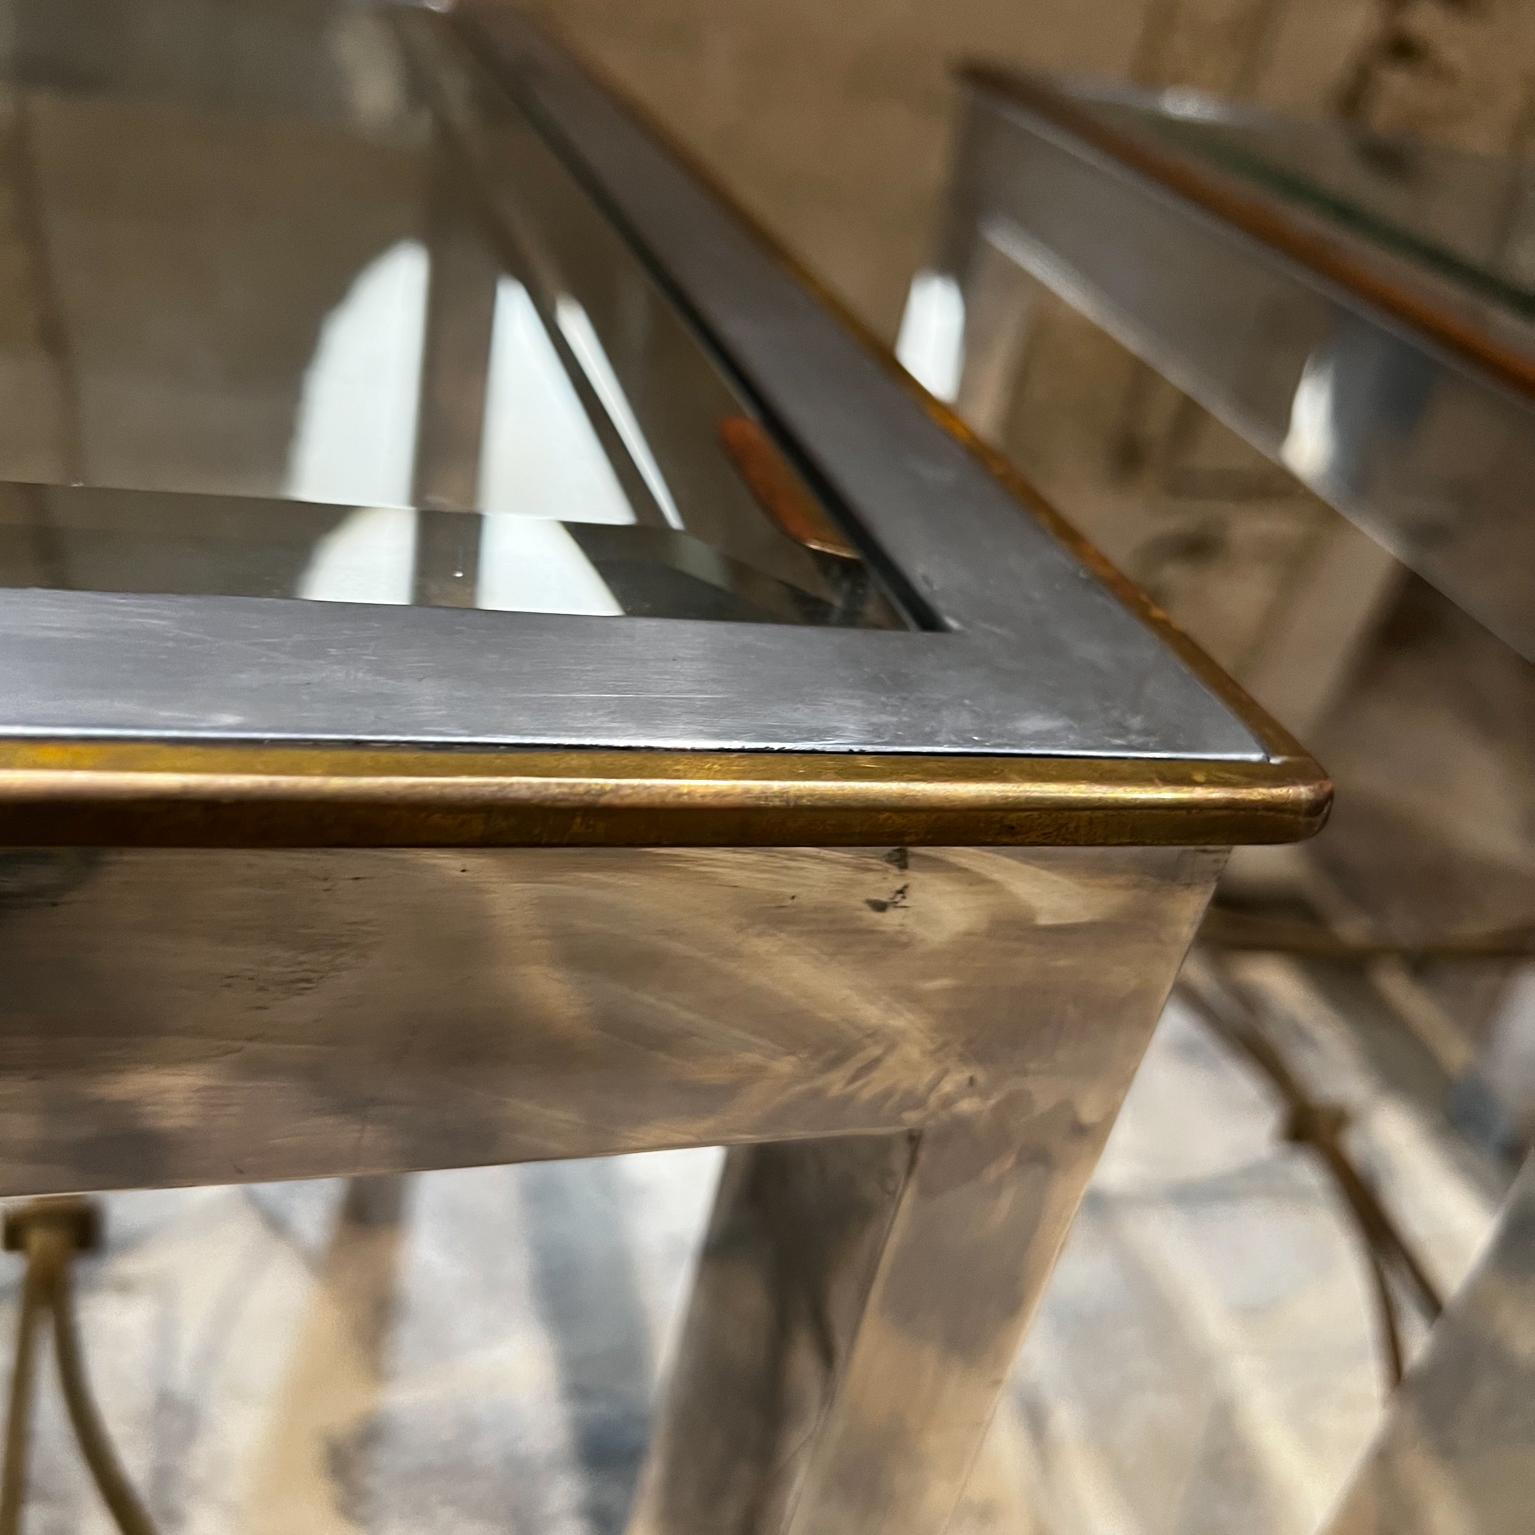 1960s Arturo Pani Modern Side Tables Aluminum and Bronze Mexico City For Sale 3